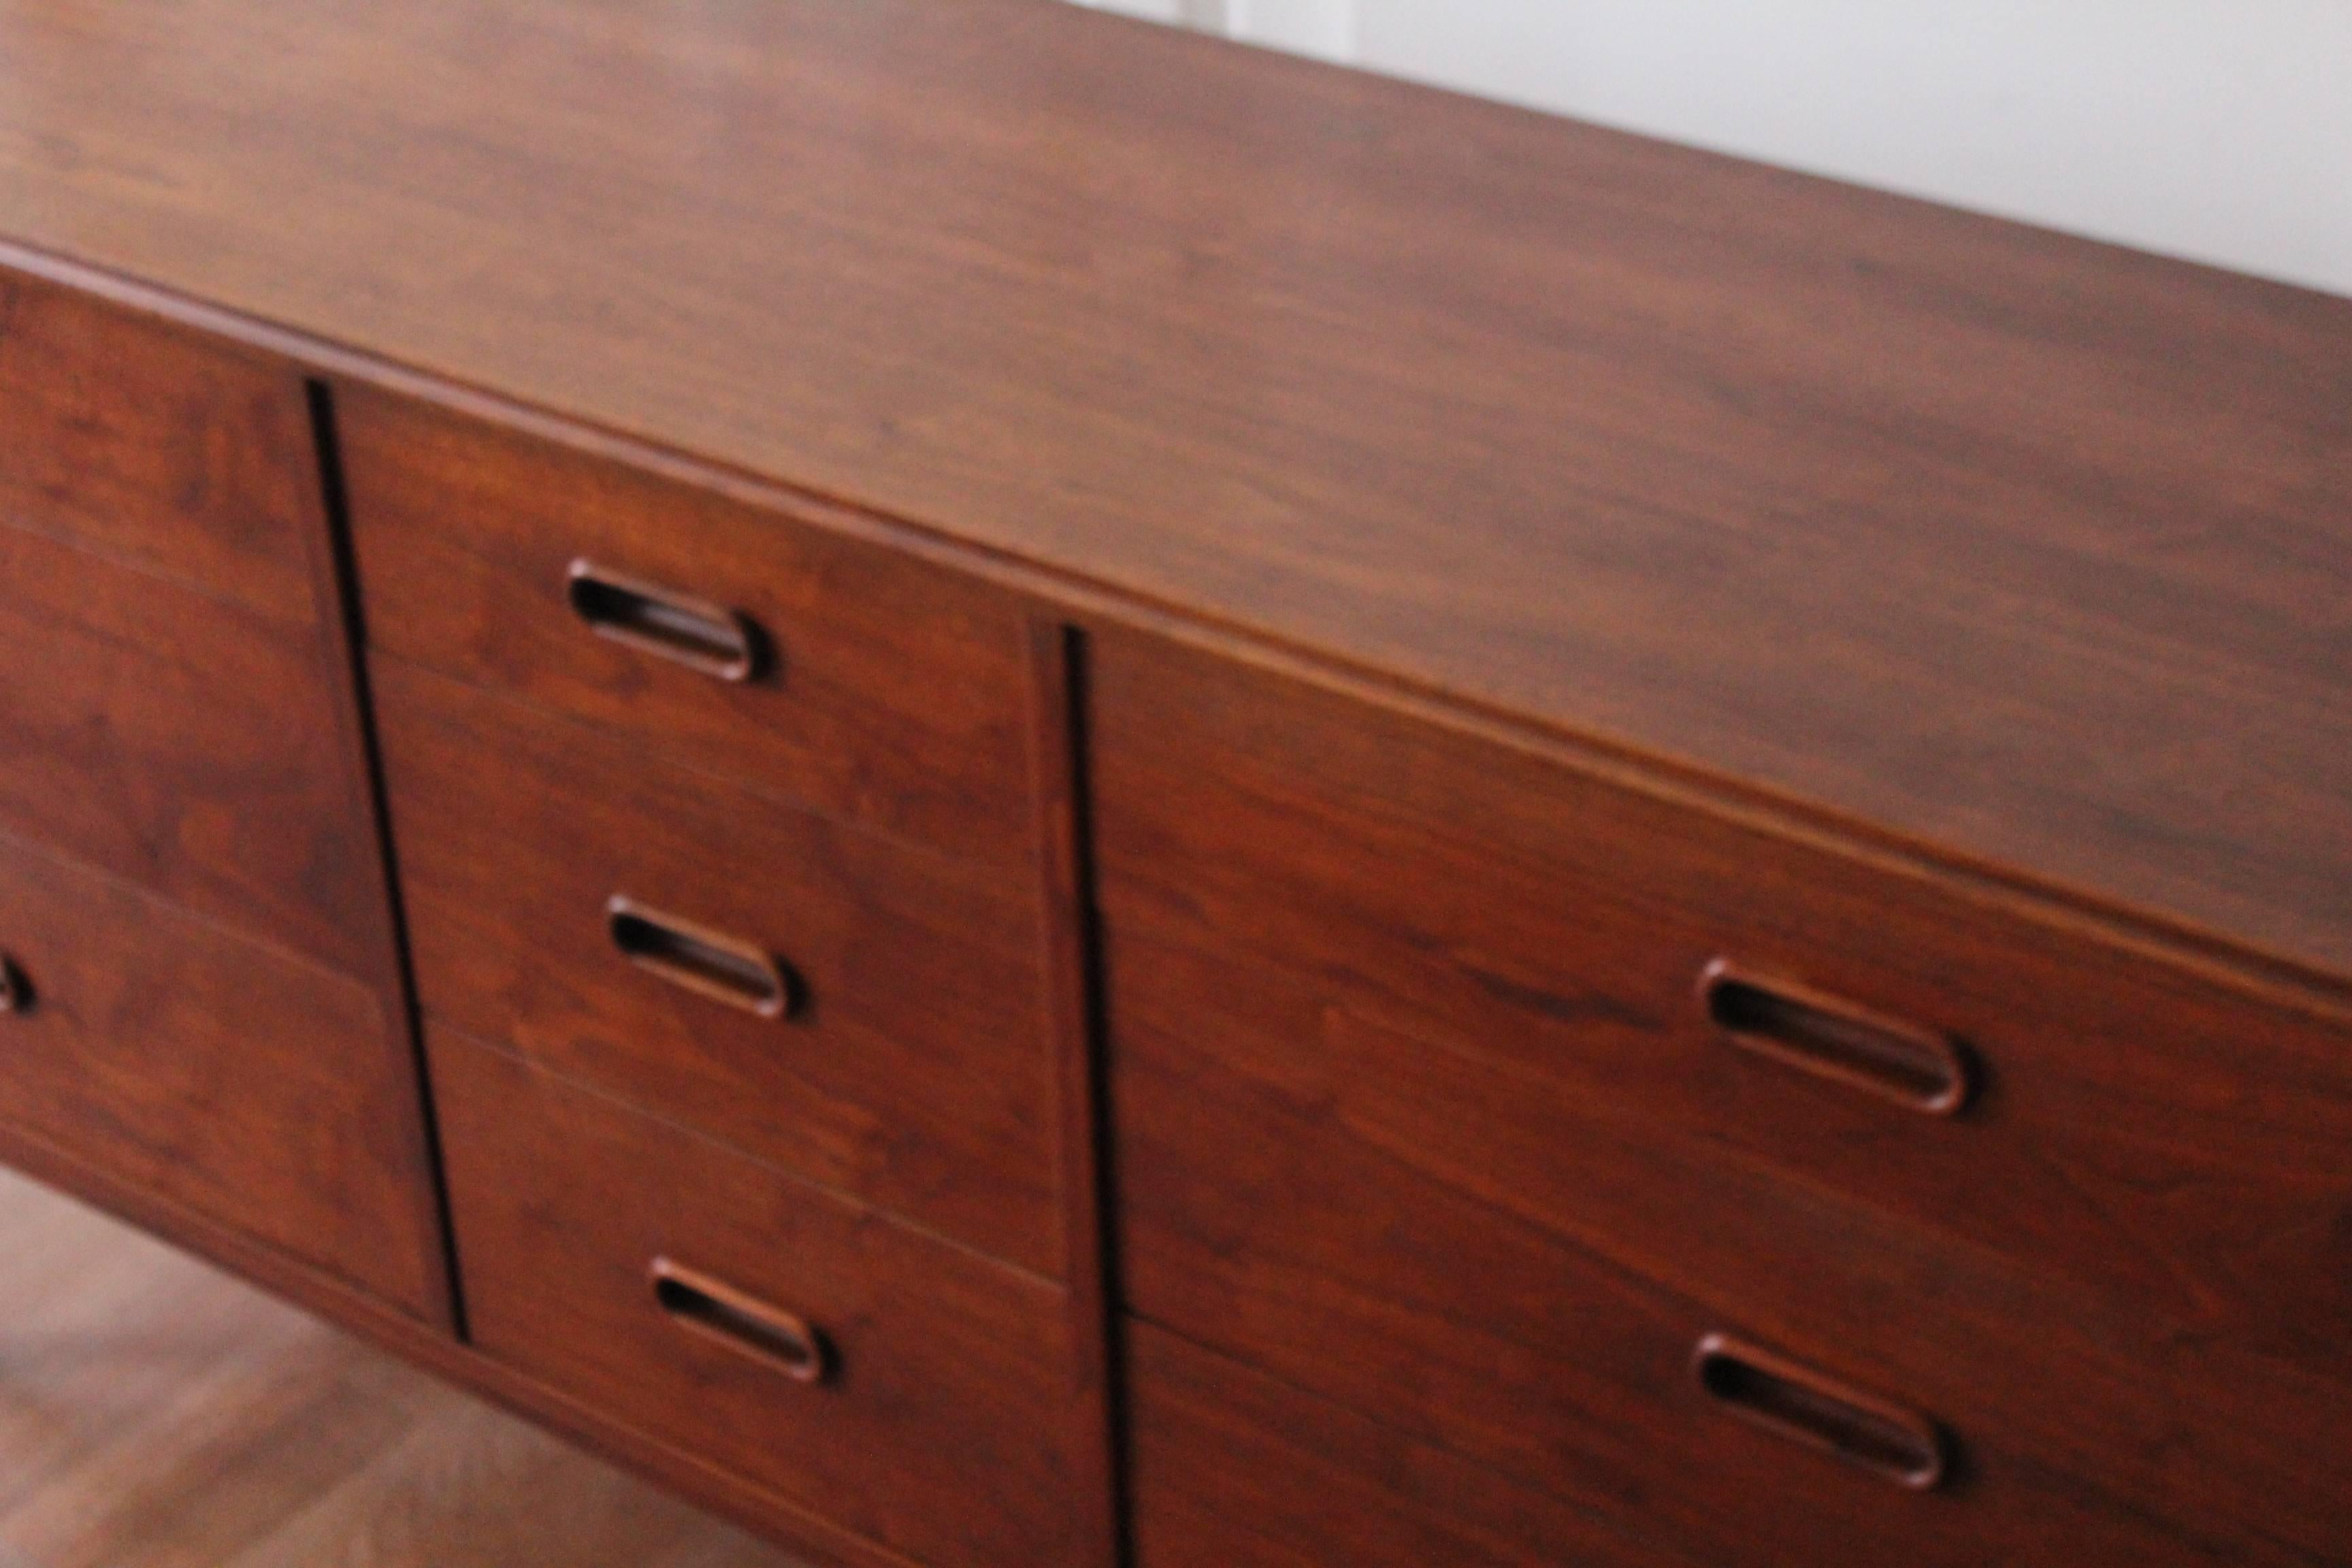 Oiled Walnut Mid-Century Modern Dresser by Jack Cartwright for Founders